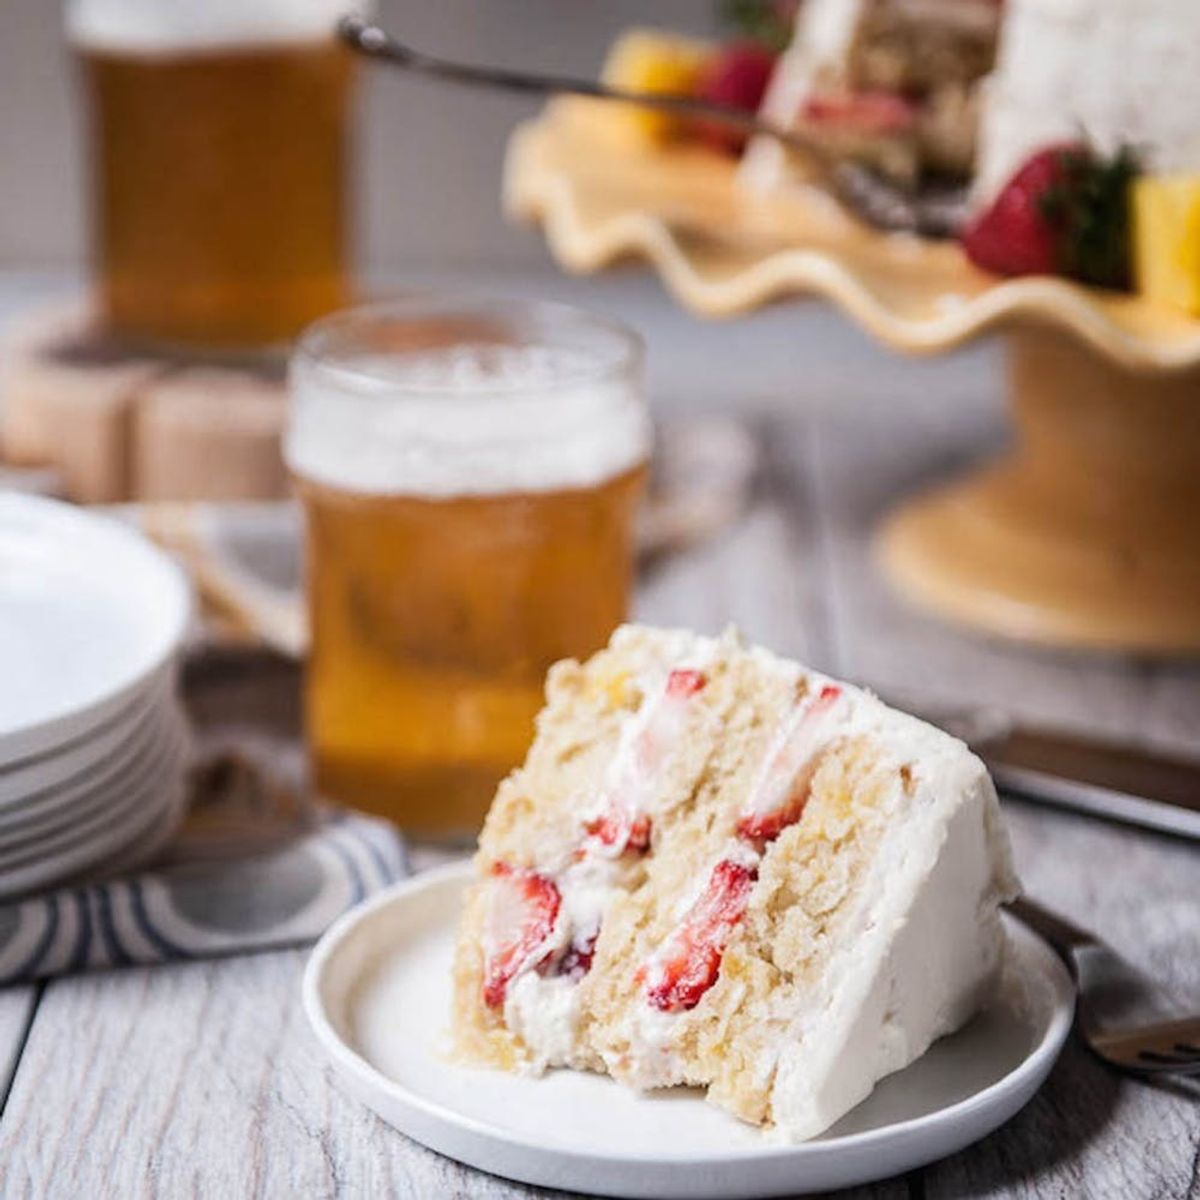 15 Beer Desserts for Father’s Day